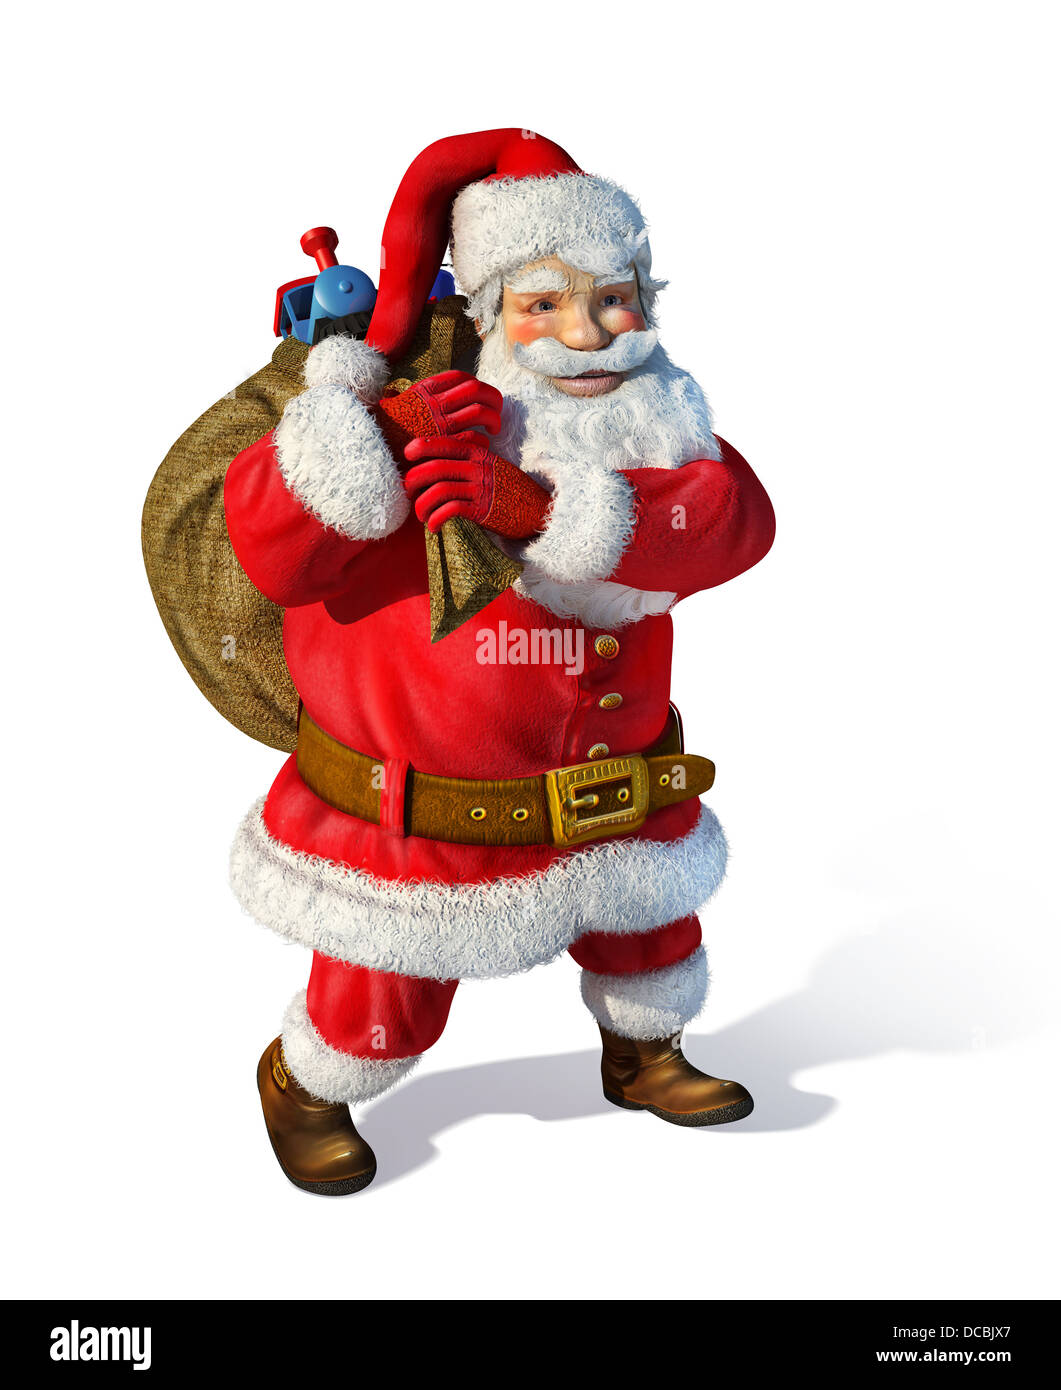 Santa Claus standing with bag behind his shoulders, with toys insde. On white background. Stock Photo